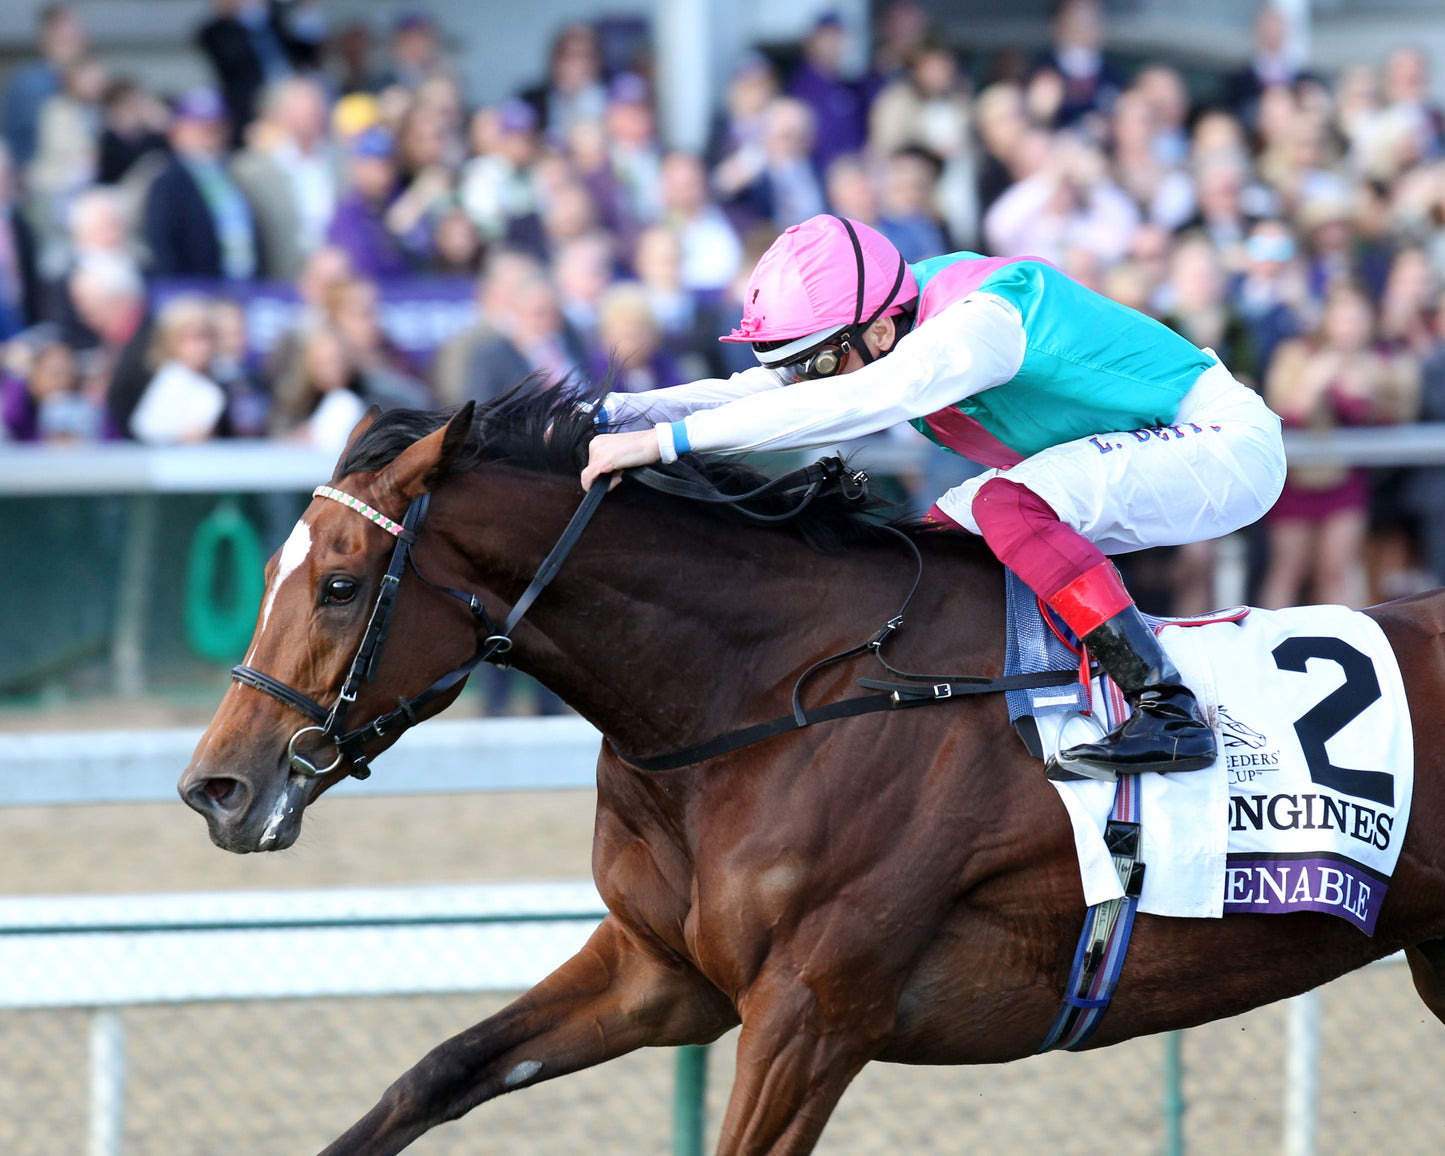 ENABLE - Longines Breeders' Cup Turf G1 - 11-03-18 - R10 - CD - Inside Finish 04